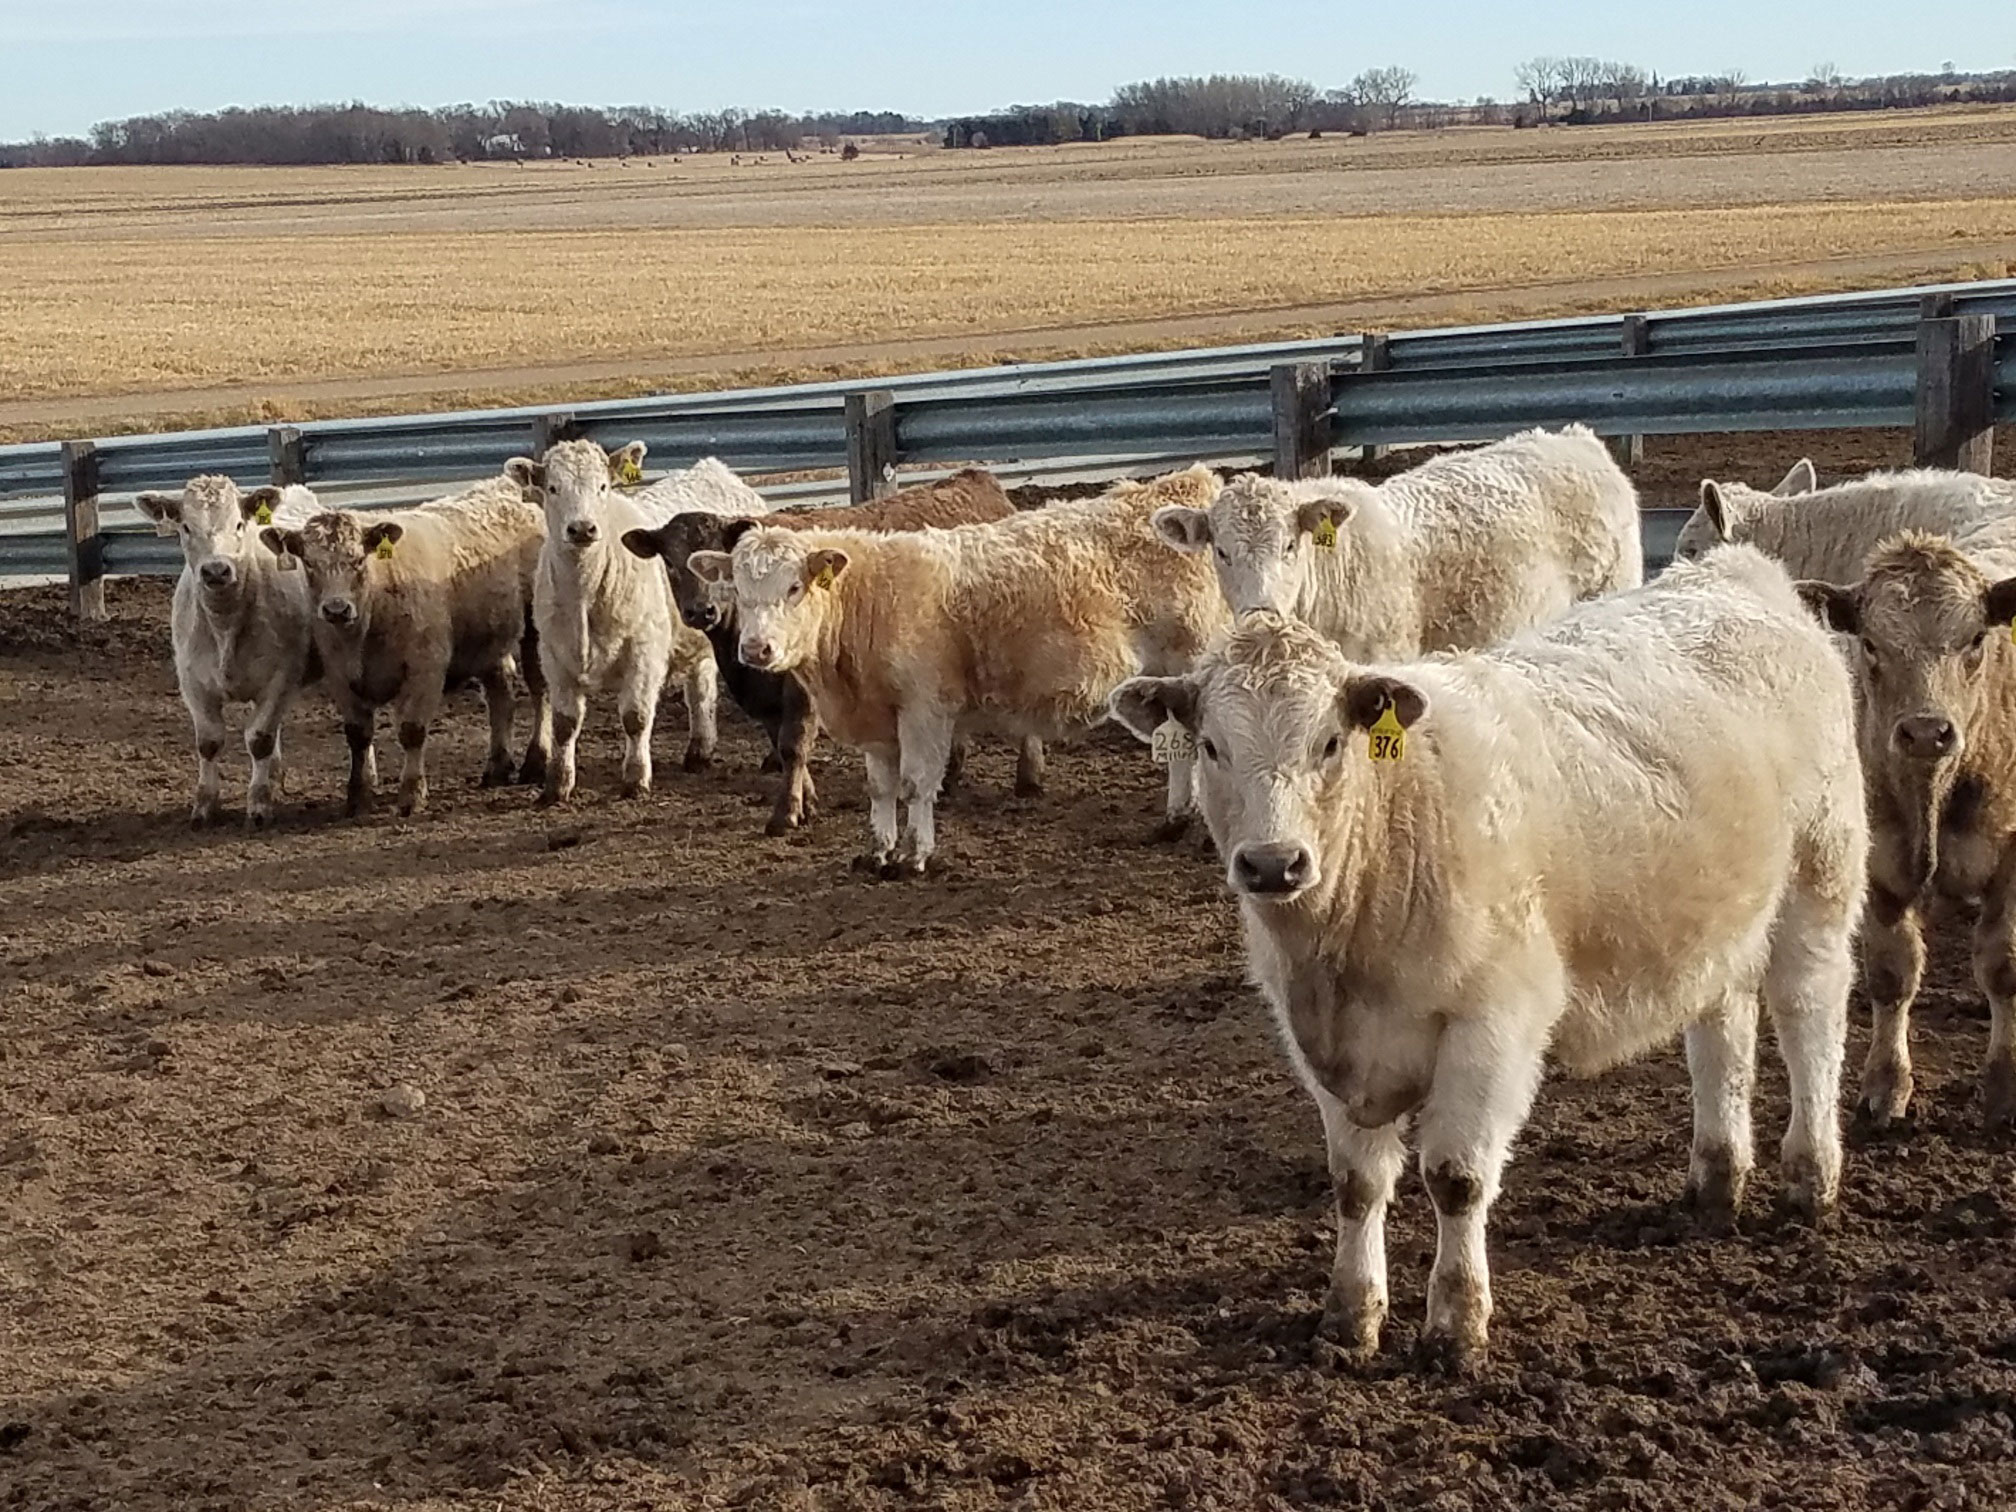 A group of white cattle standing in a feedlot.